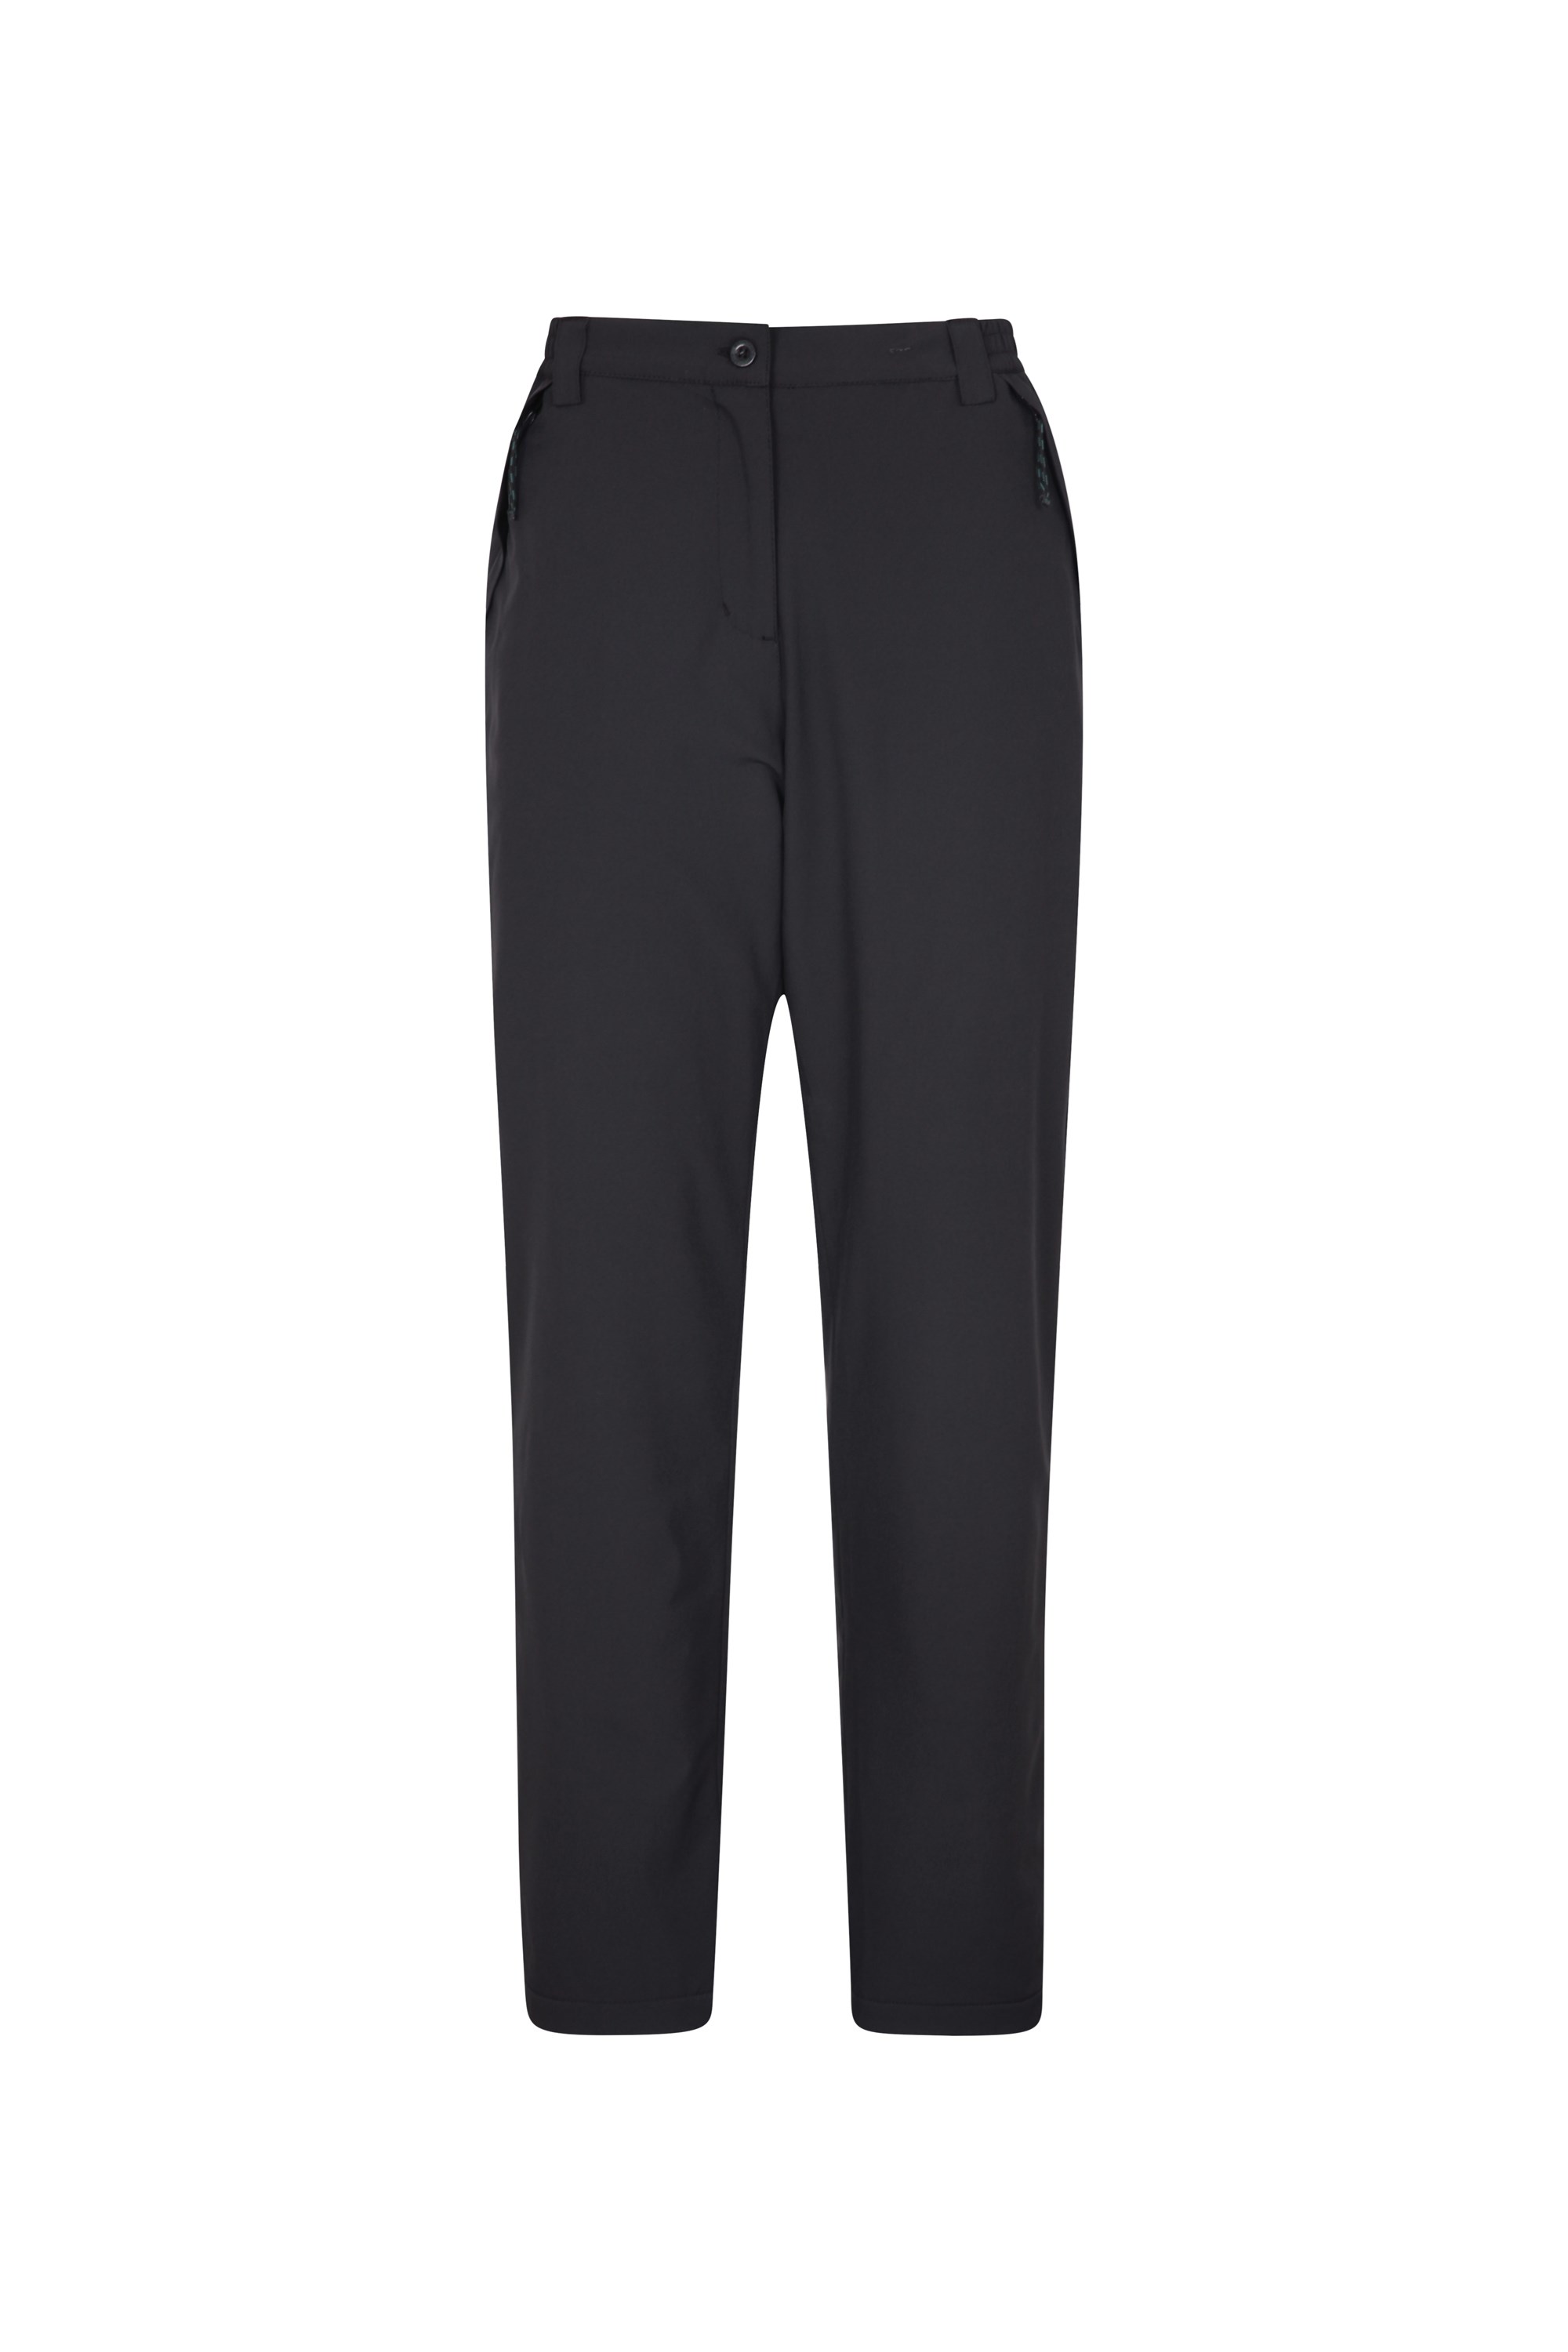 Arctic Fleece Lined Stretch Womens Trousers - Black